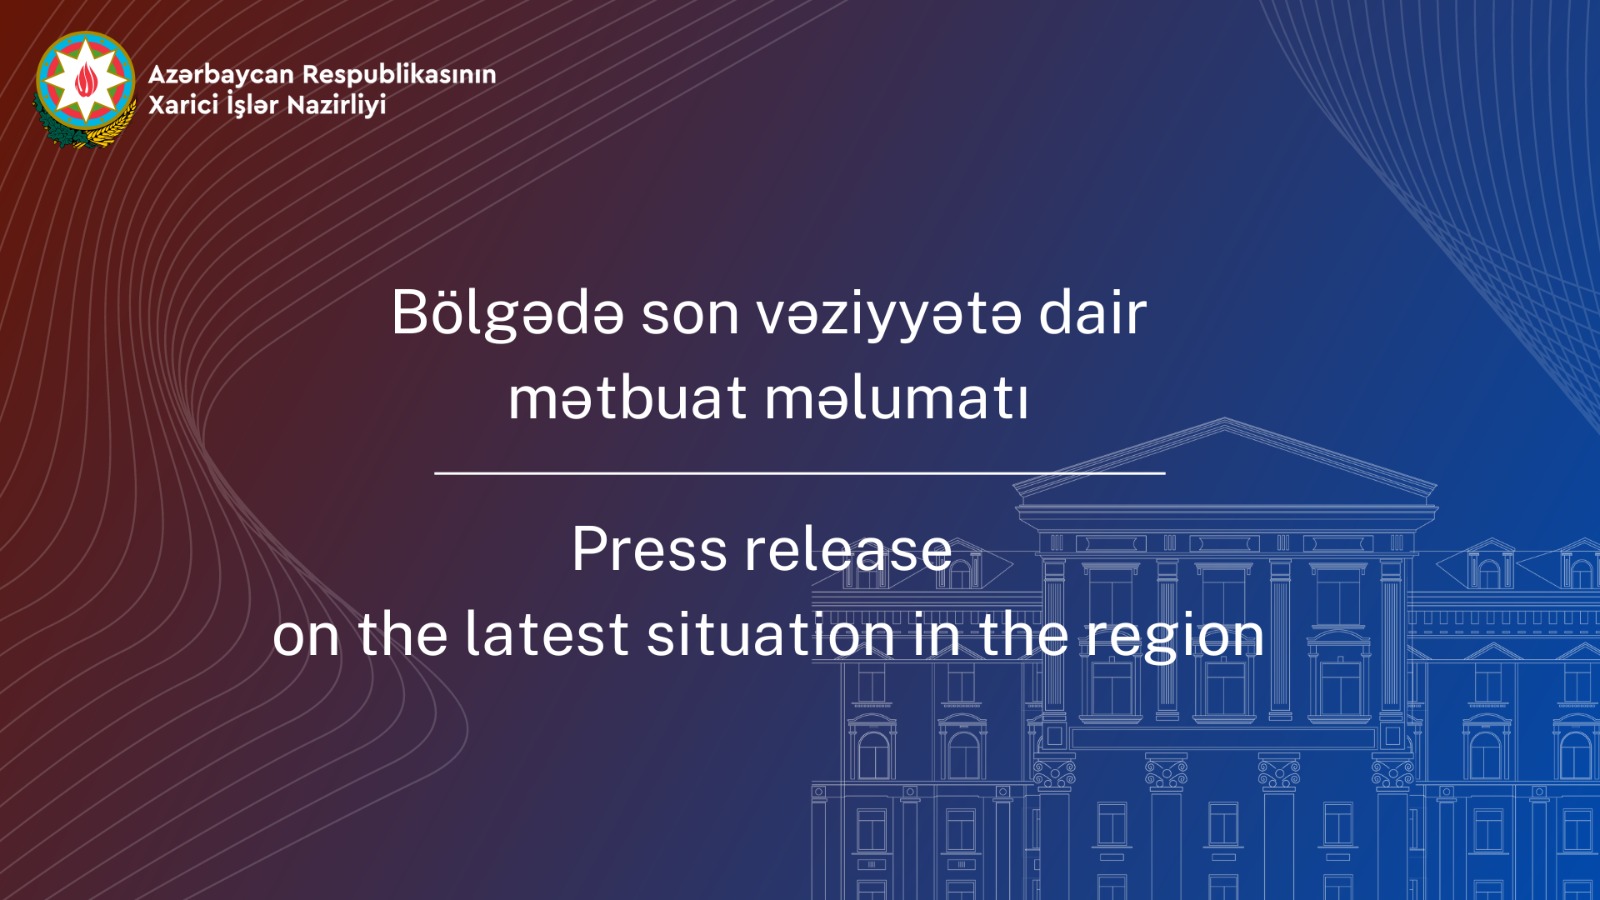 No:472/23, Press release on the briefing for the diplomatic corps accredited in the Republic of Azerbaijan on the latest situation in the region Xeber basligi